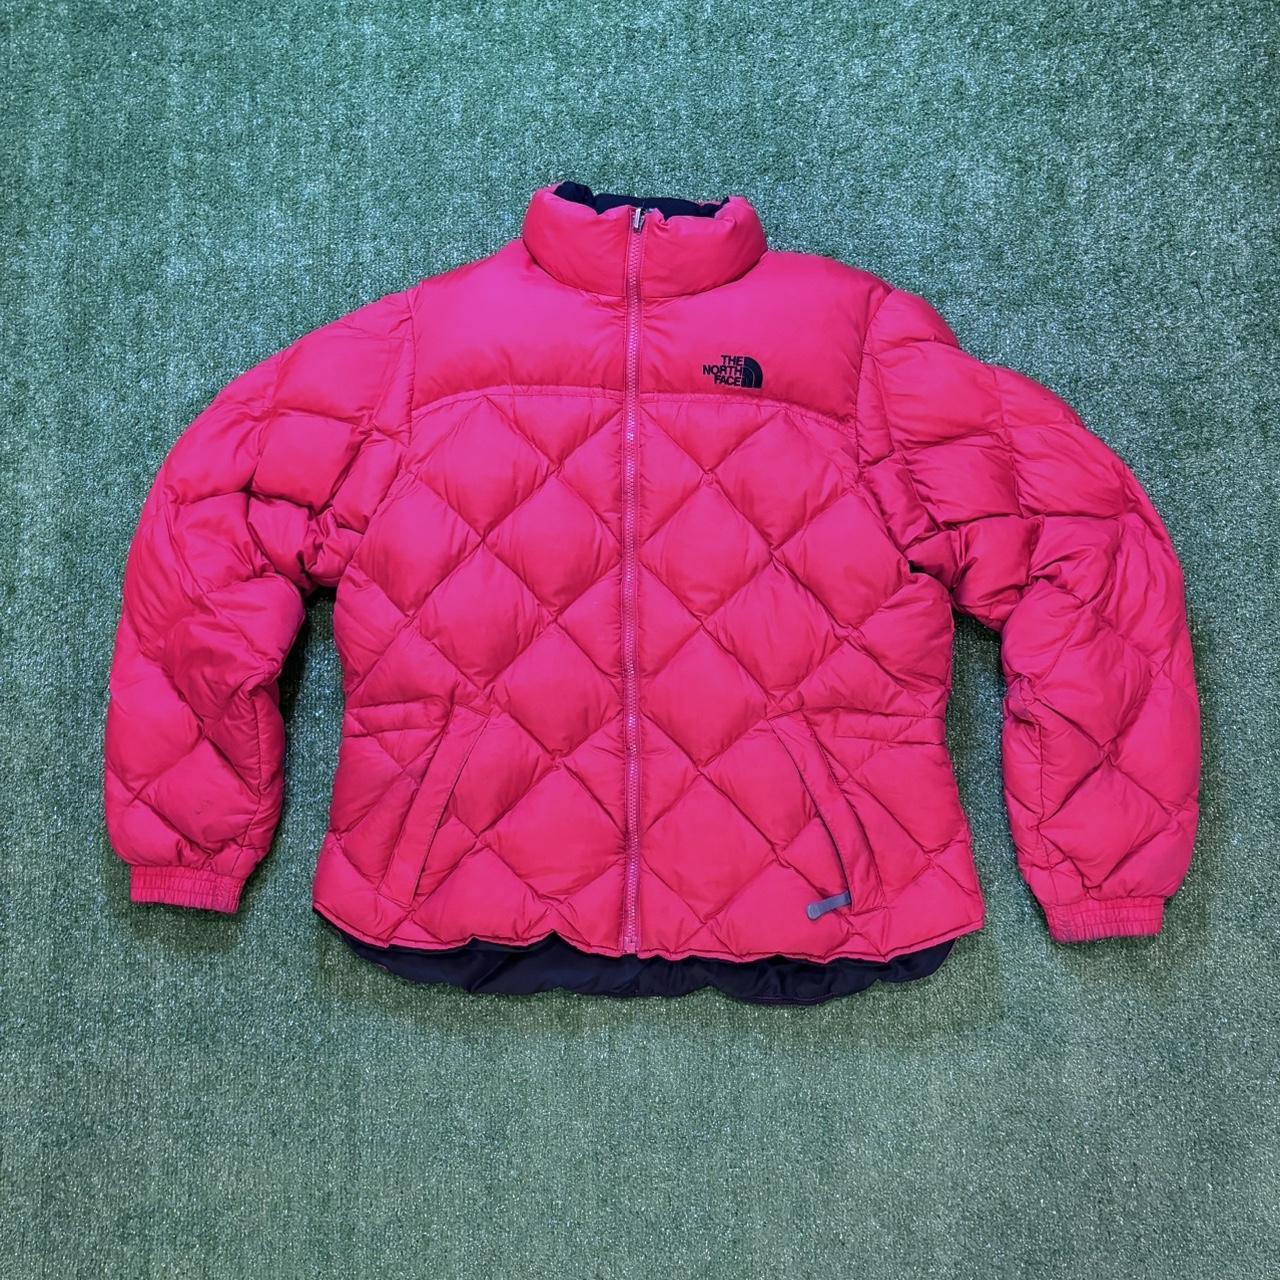 North face red puffer jacket size XL in good... - Depop